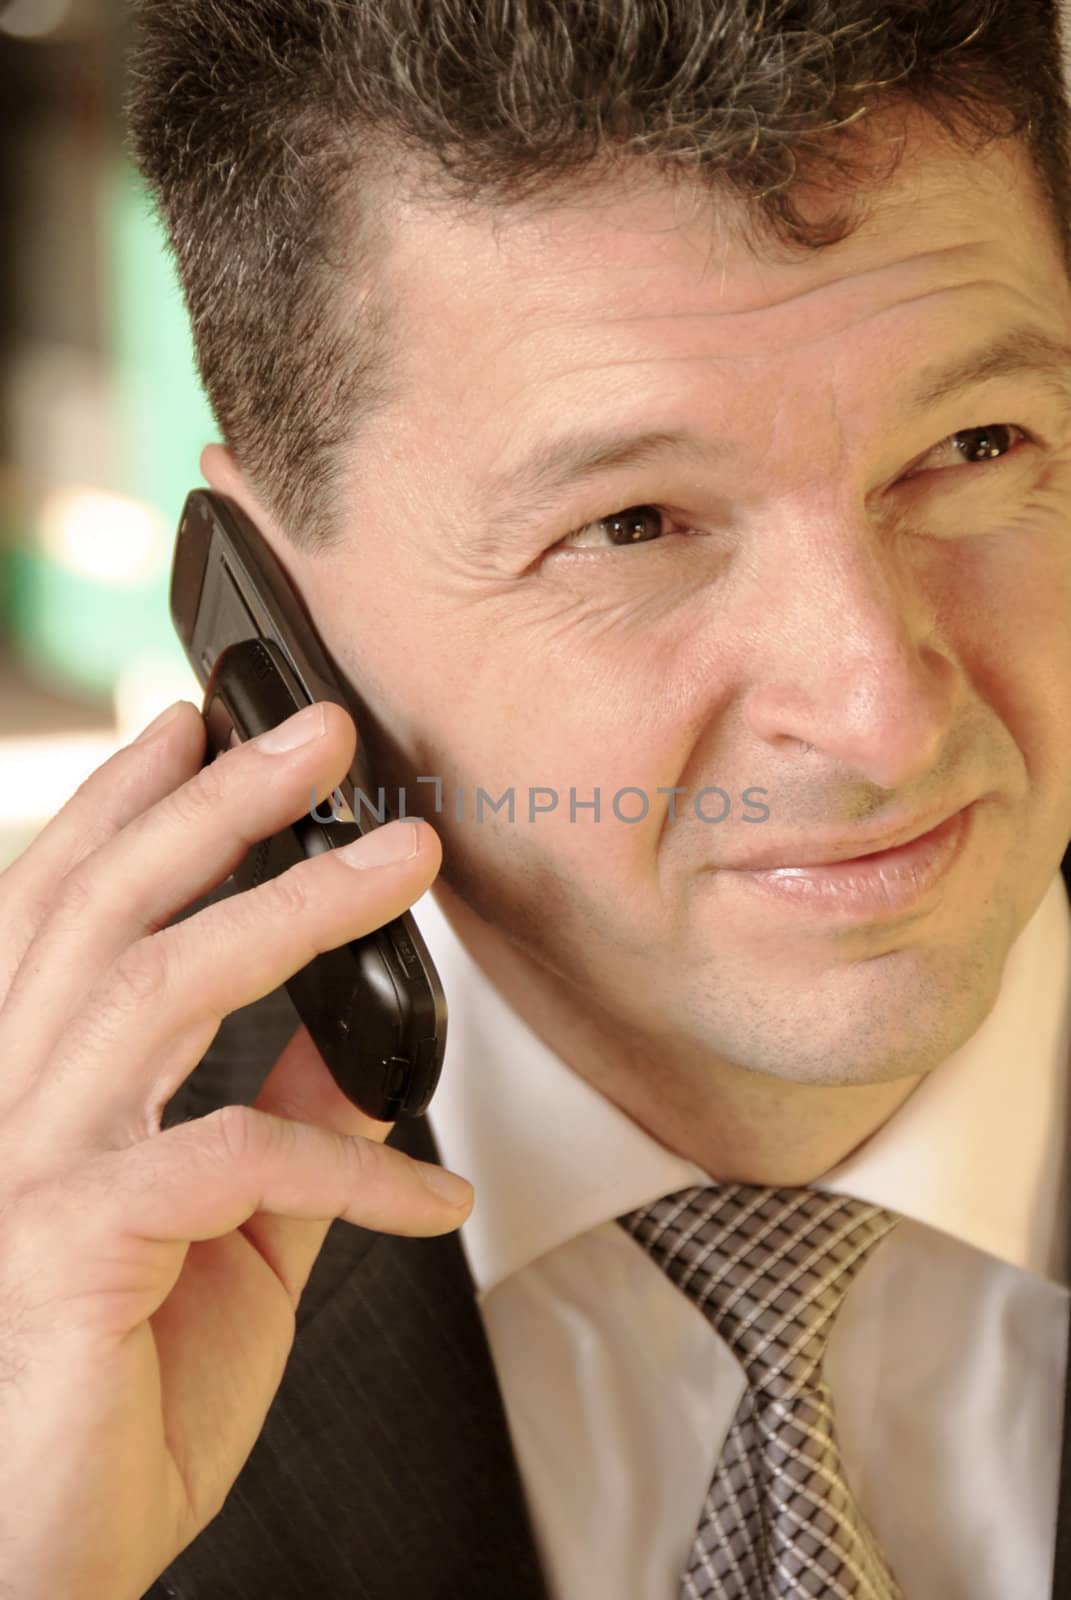 business man with mobile phone in hand with unpleasant facial expression